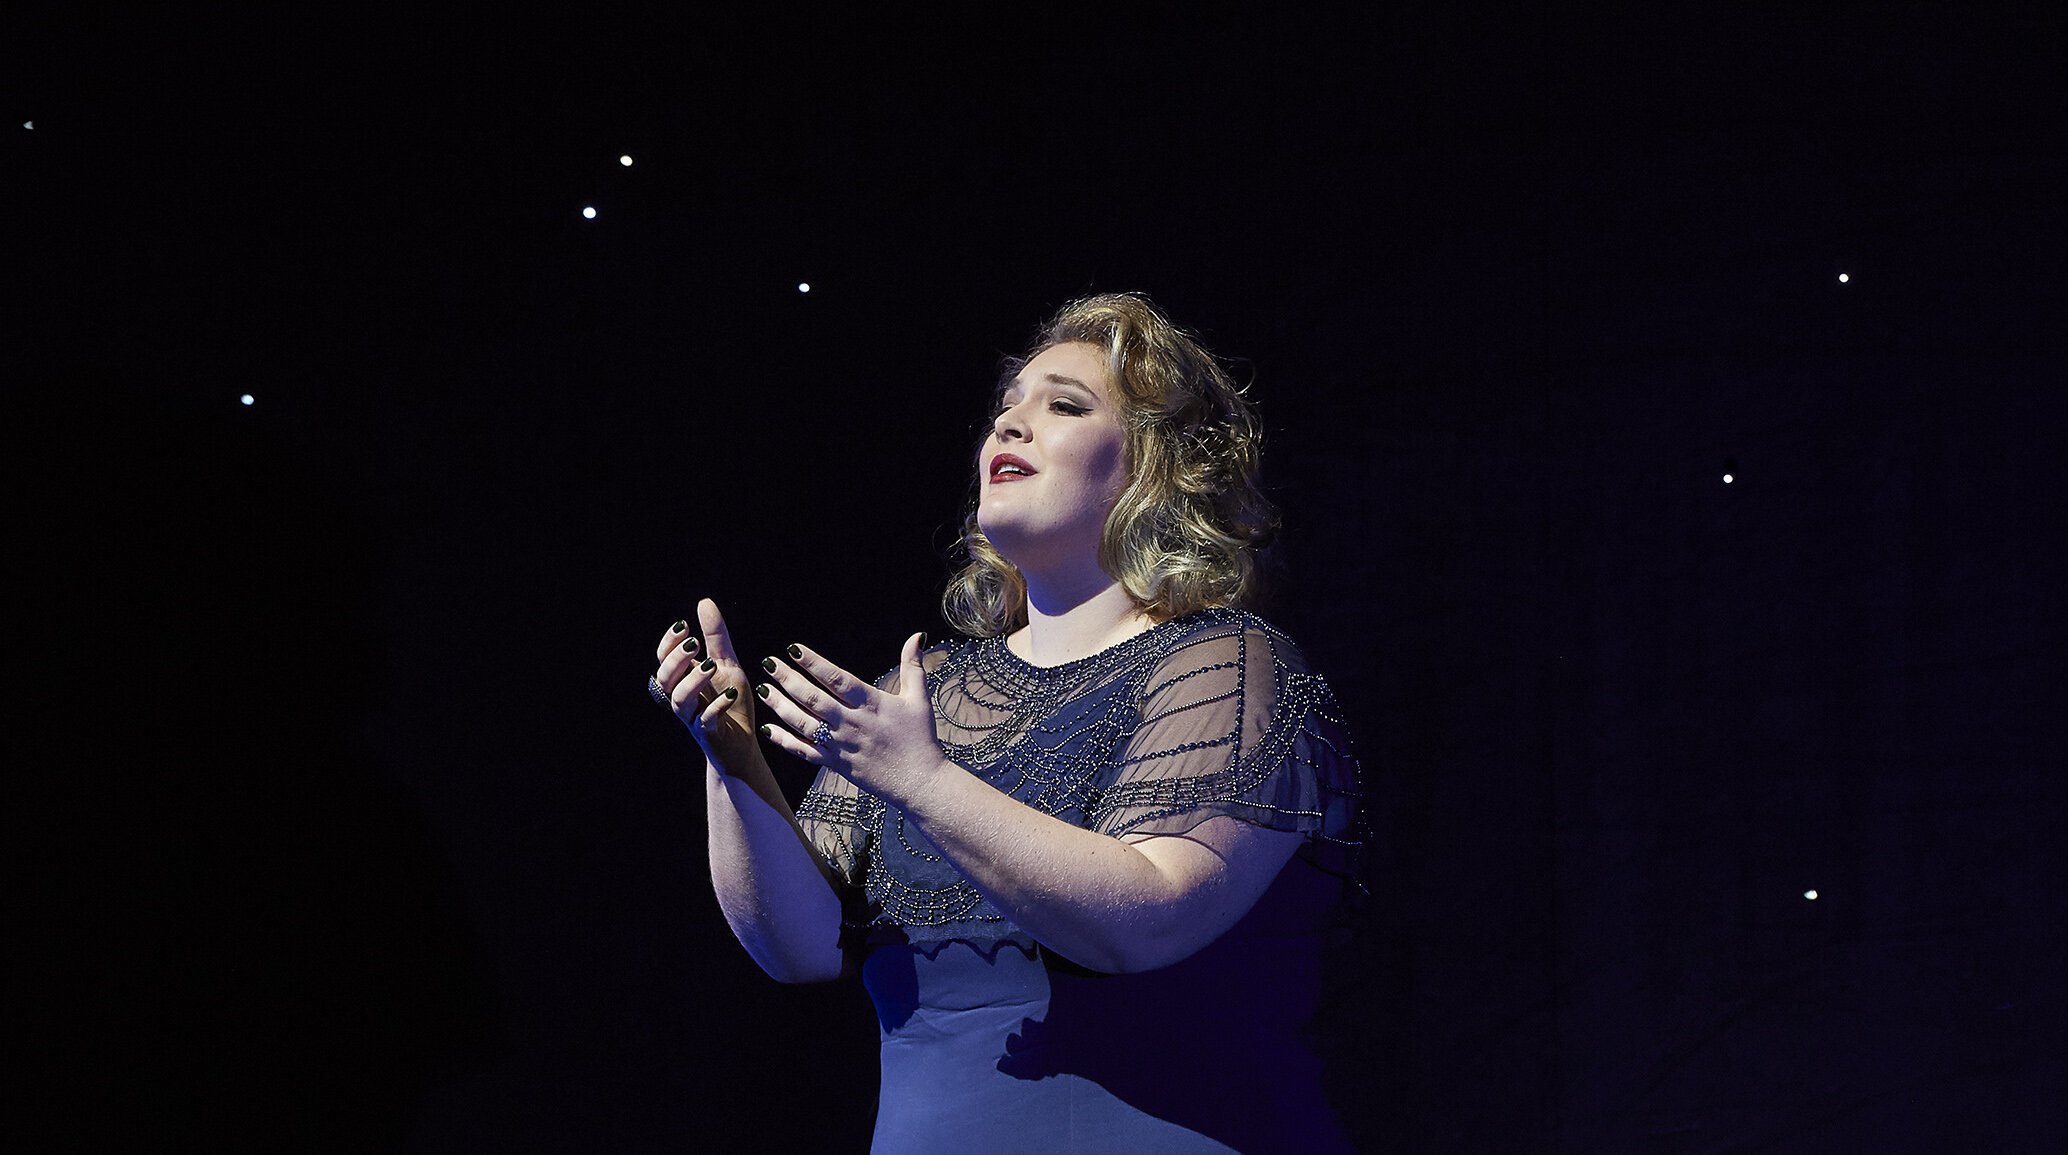  “Her vocal plushness, amplitude and range are mature beyond her years.” Gianmarco Segato,  Opera Canada  